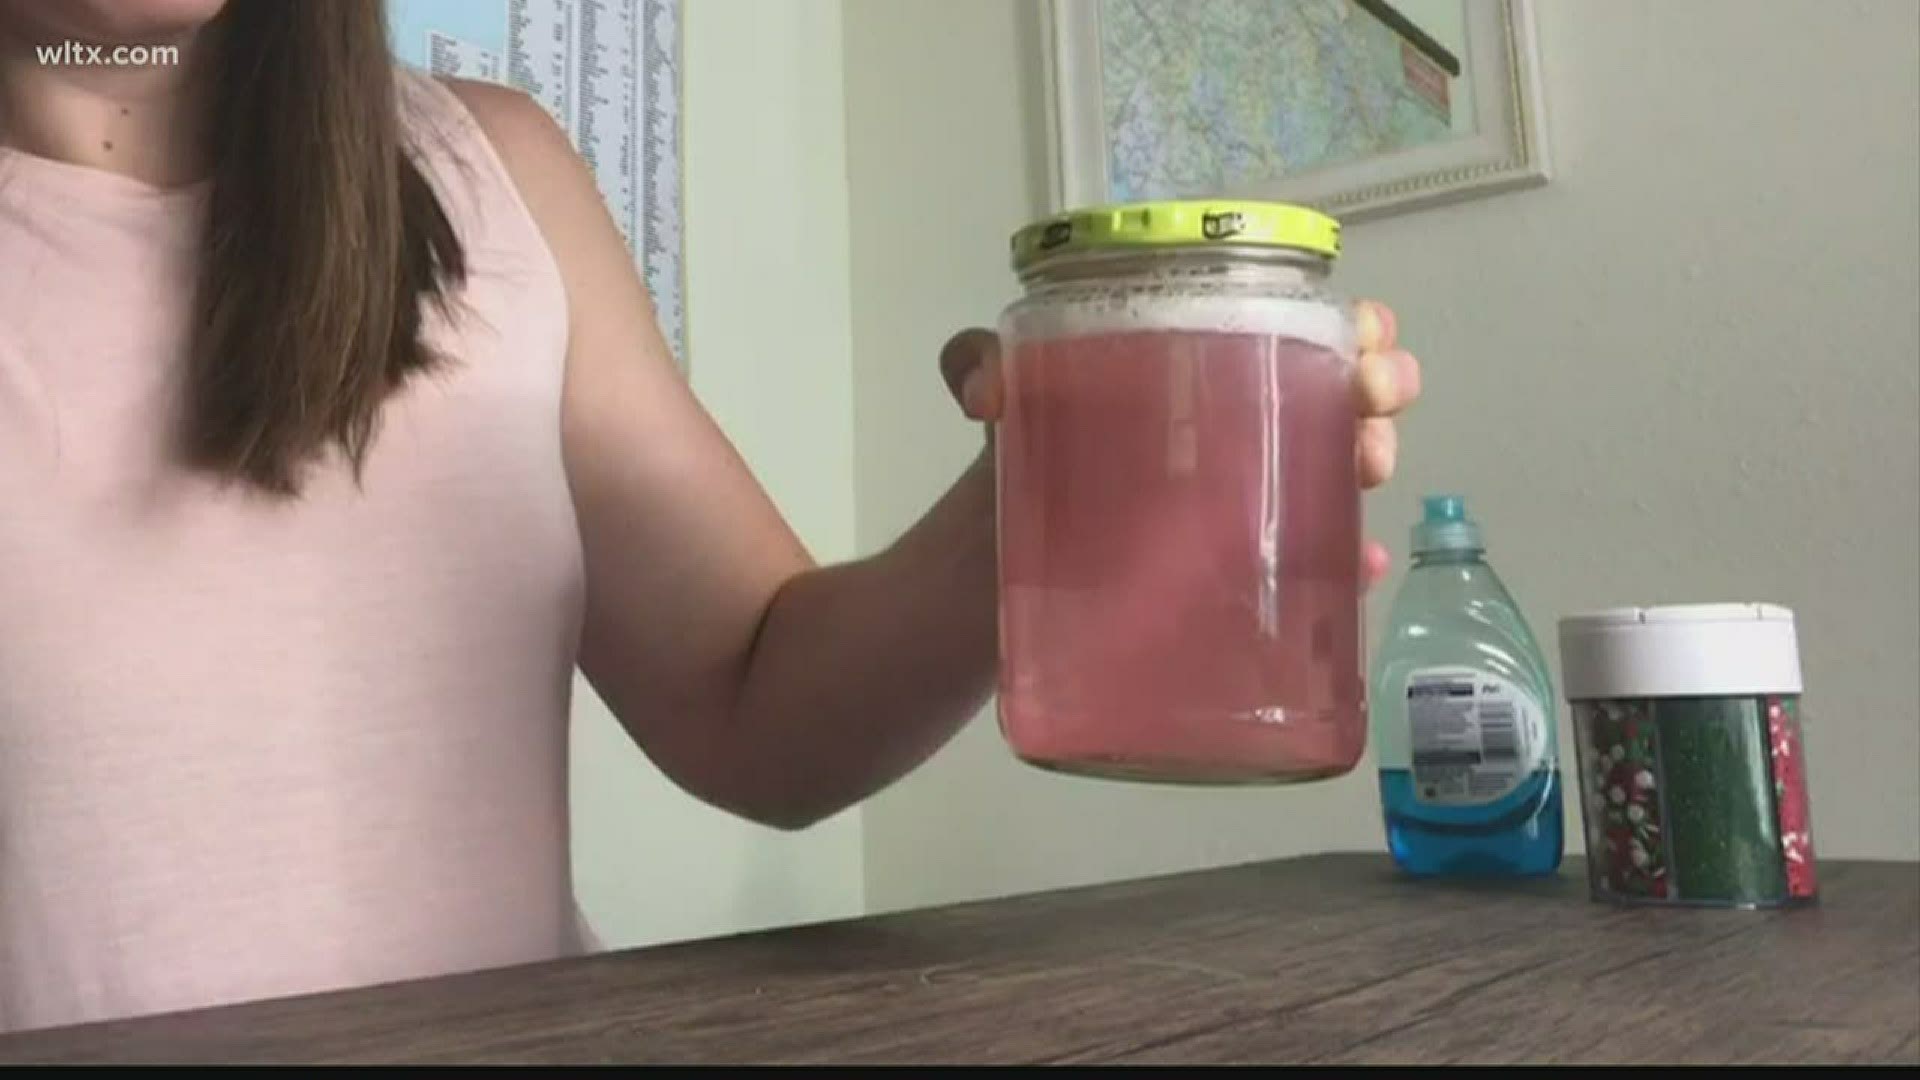 Learn how to make a tornado in a jar with this easy science experiment.